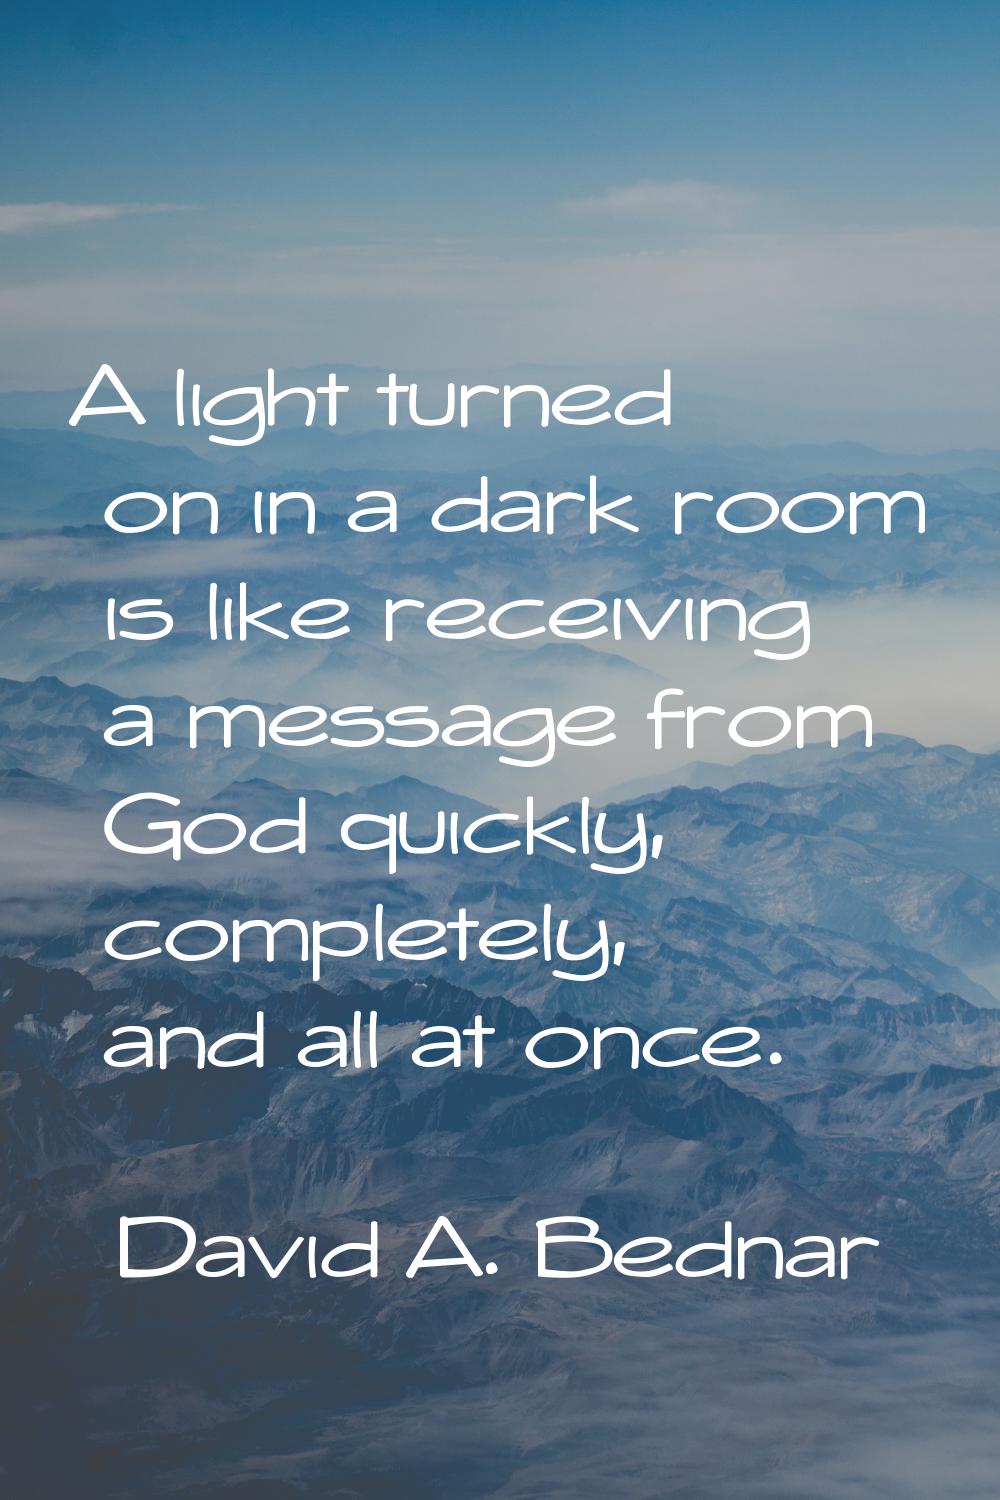 A light turned on in a dark room is like receiving a message from God quickly, completely, and all 